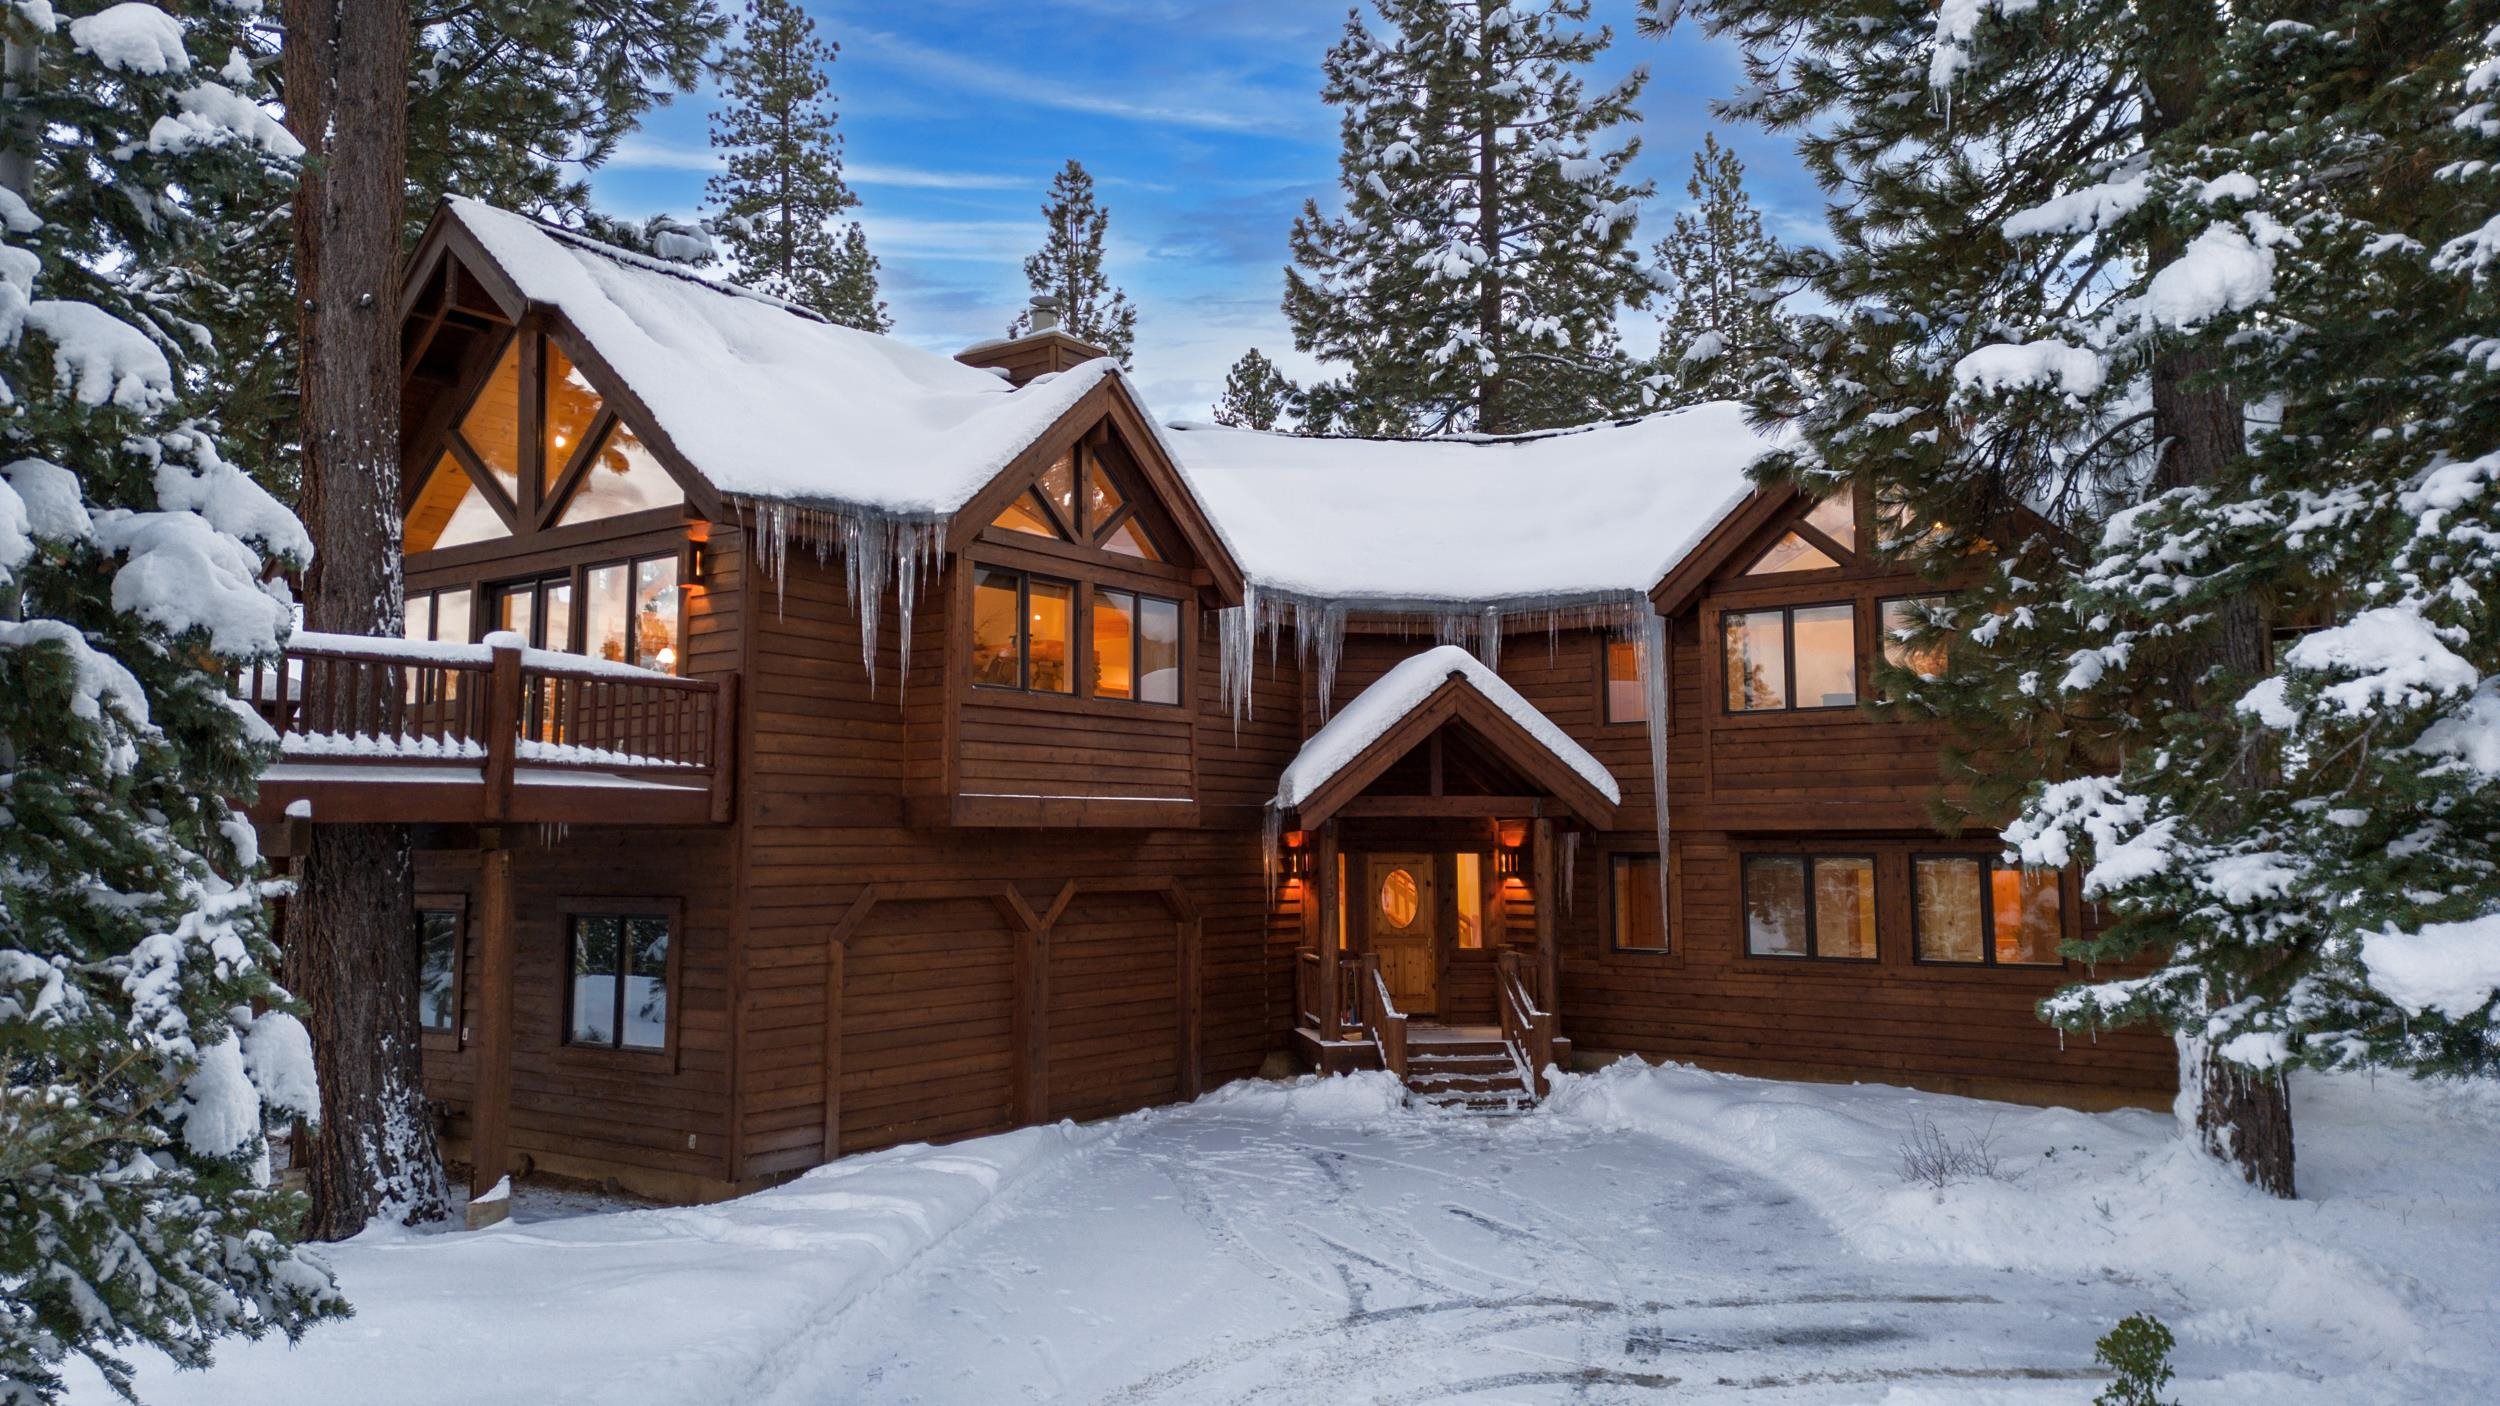 Image for 1730 Grouse Ridge Road, Truckee, CA 96161